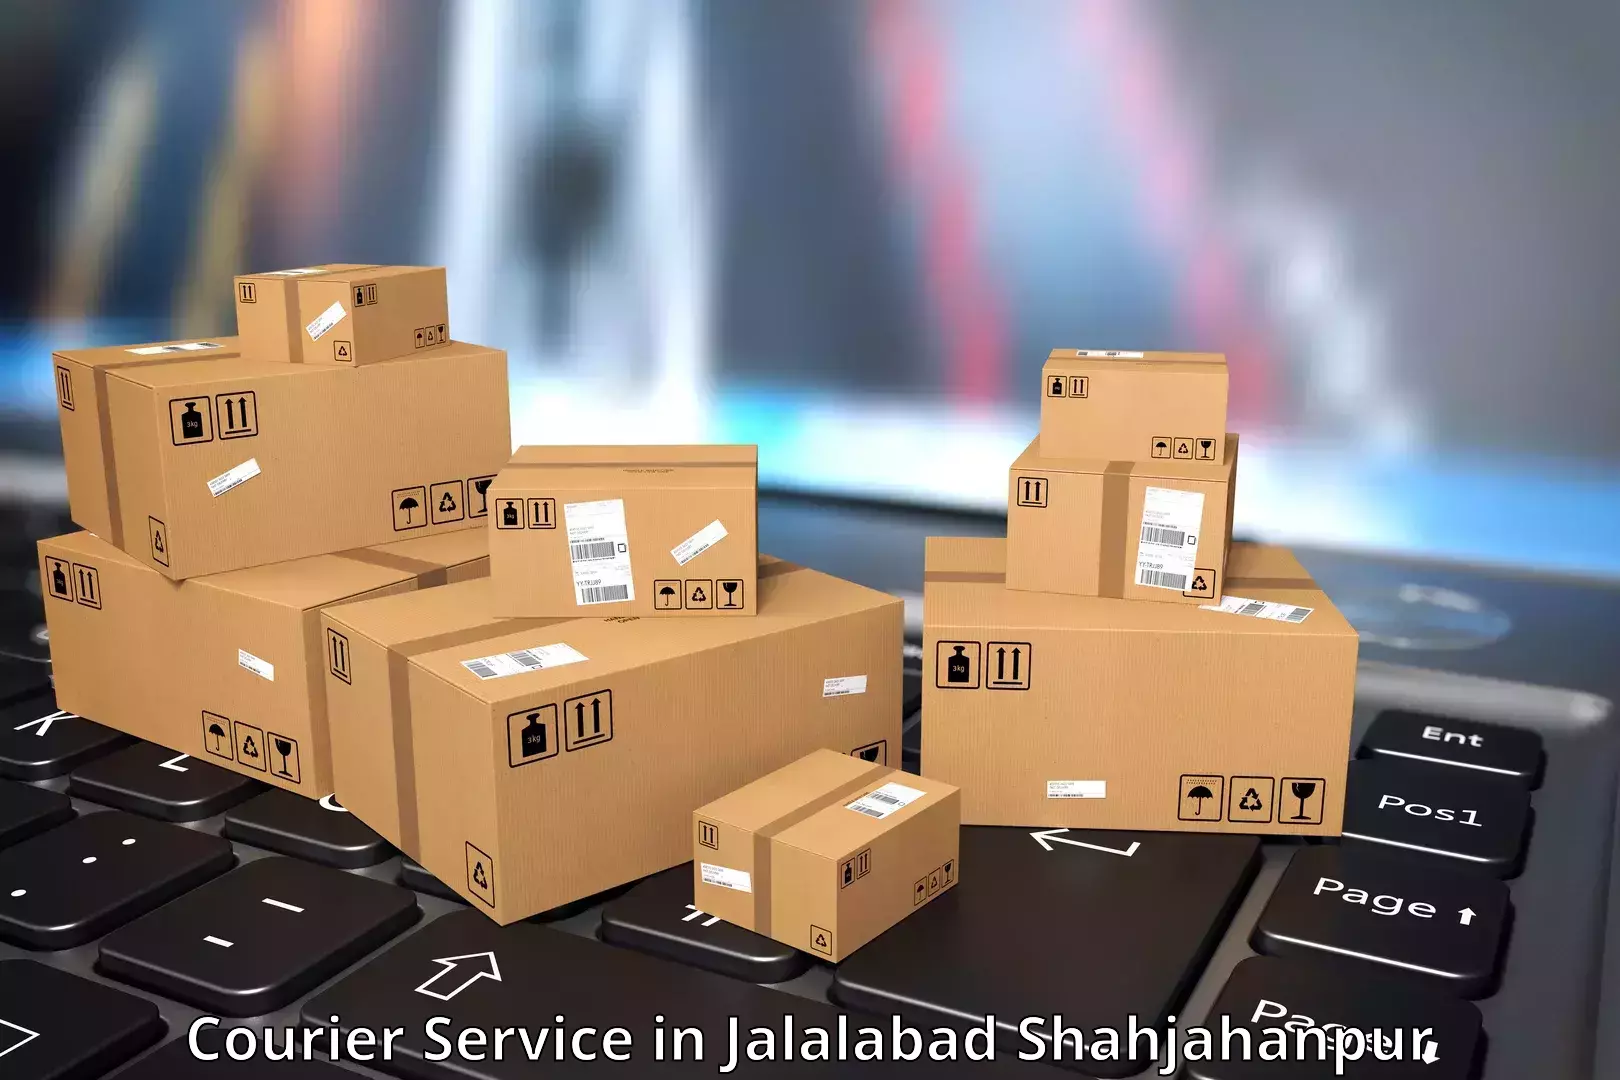 Business delivery service in Jalalabad Shahjahanpur